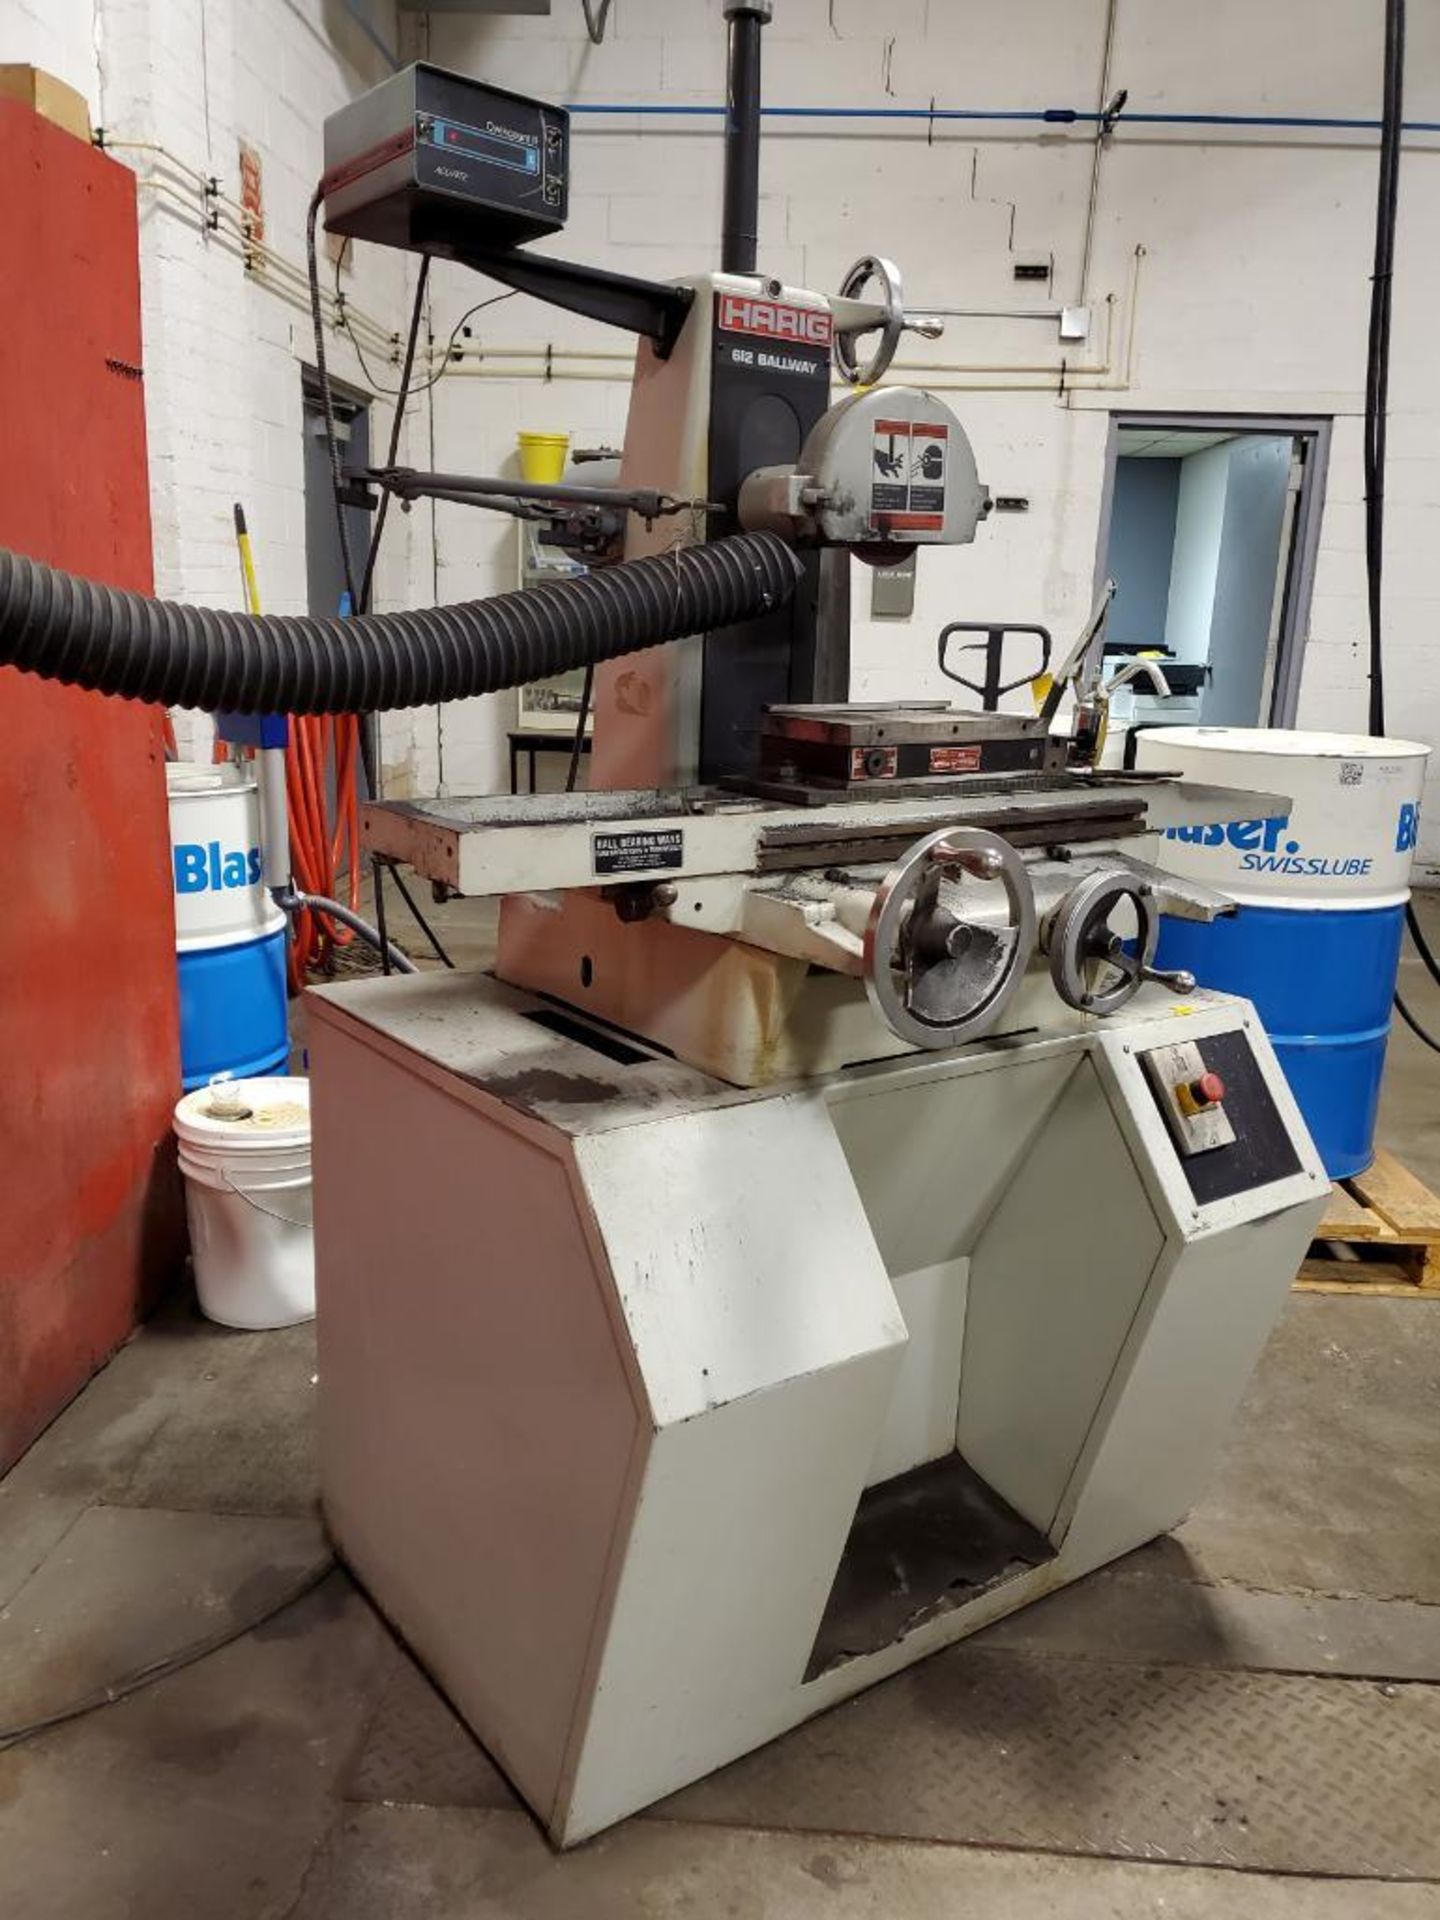 Harig 612 Ballway Automatic Surface Grinder, Acu-Rite Qwikcount 2 Single Axis DRO, Suburban 12" X 6" - Image 3 of 8